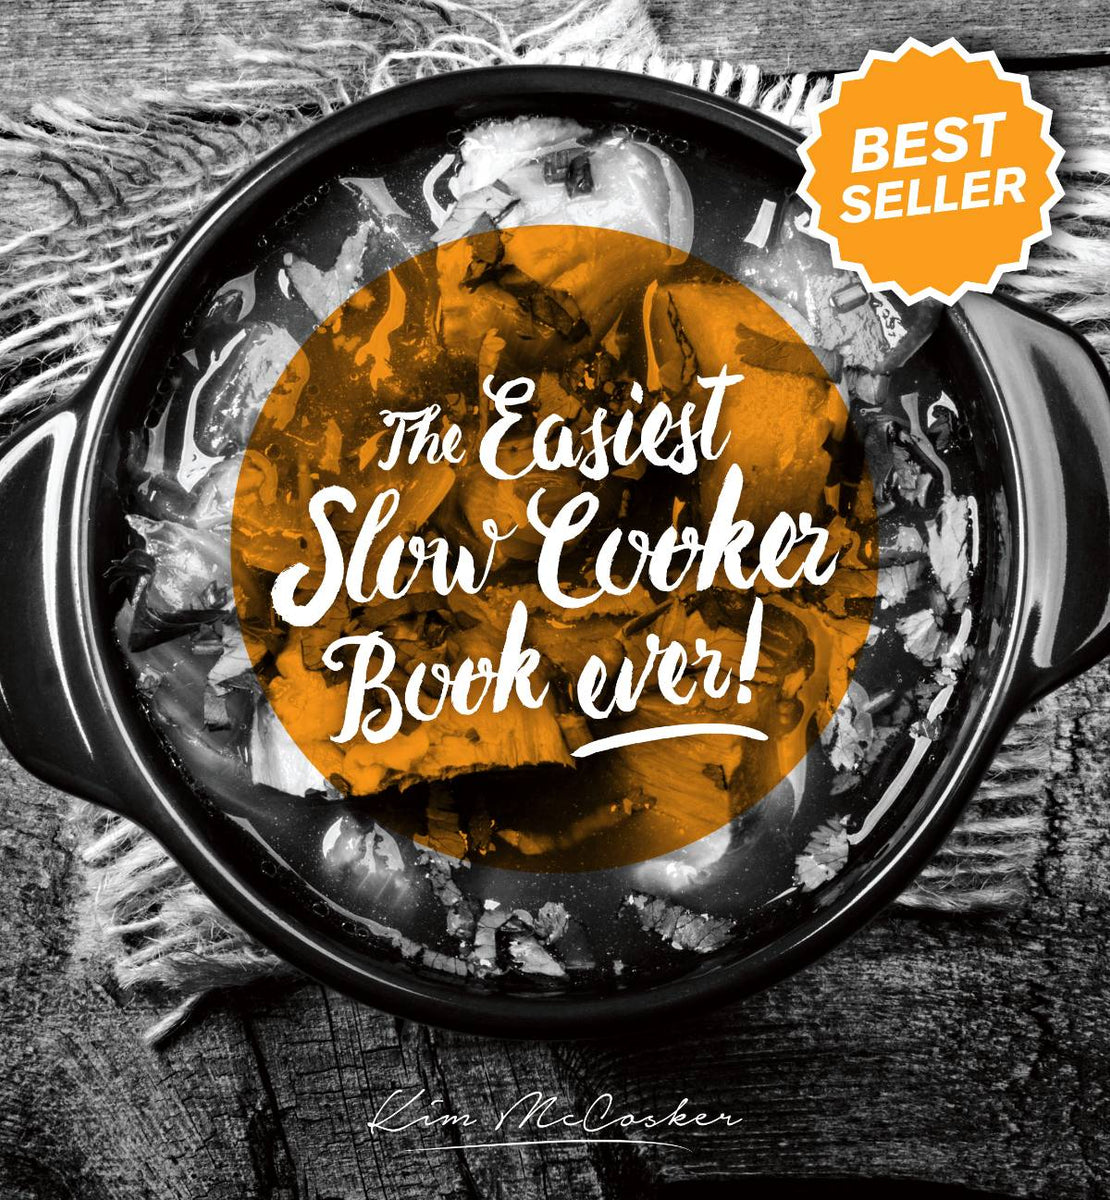 The Easiest Slow Cooker Book Ever 4